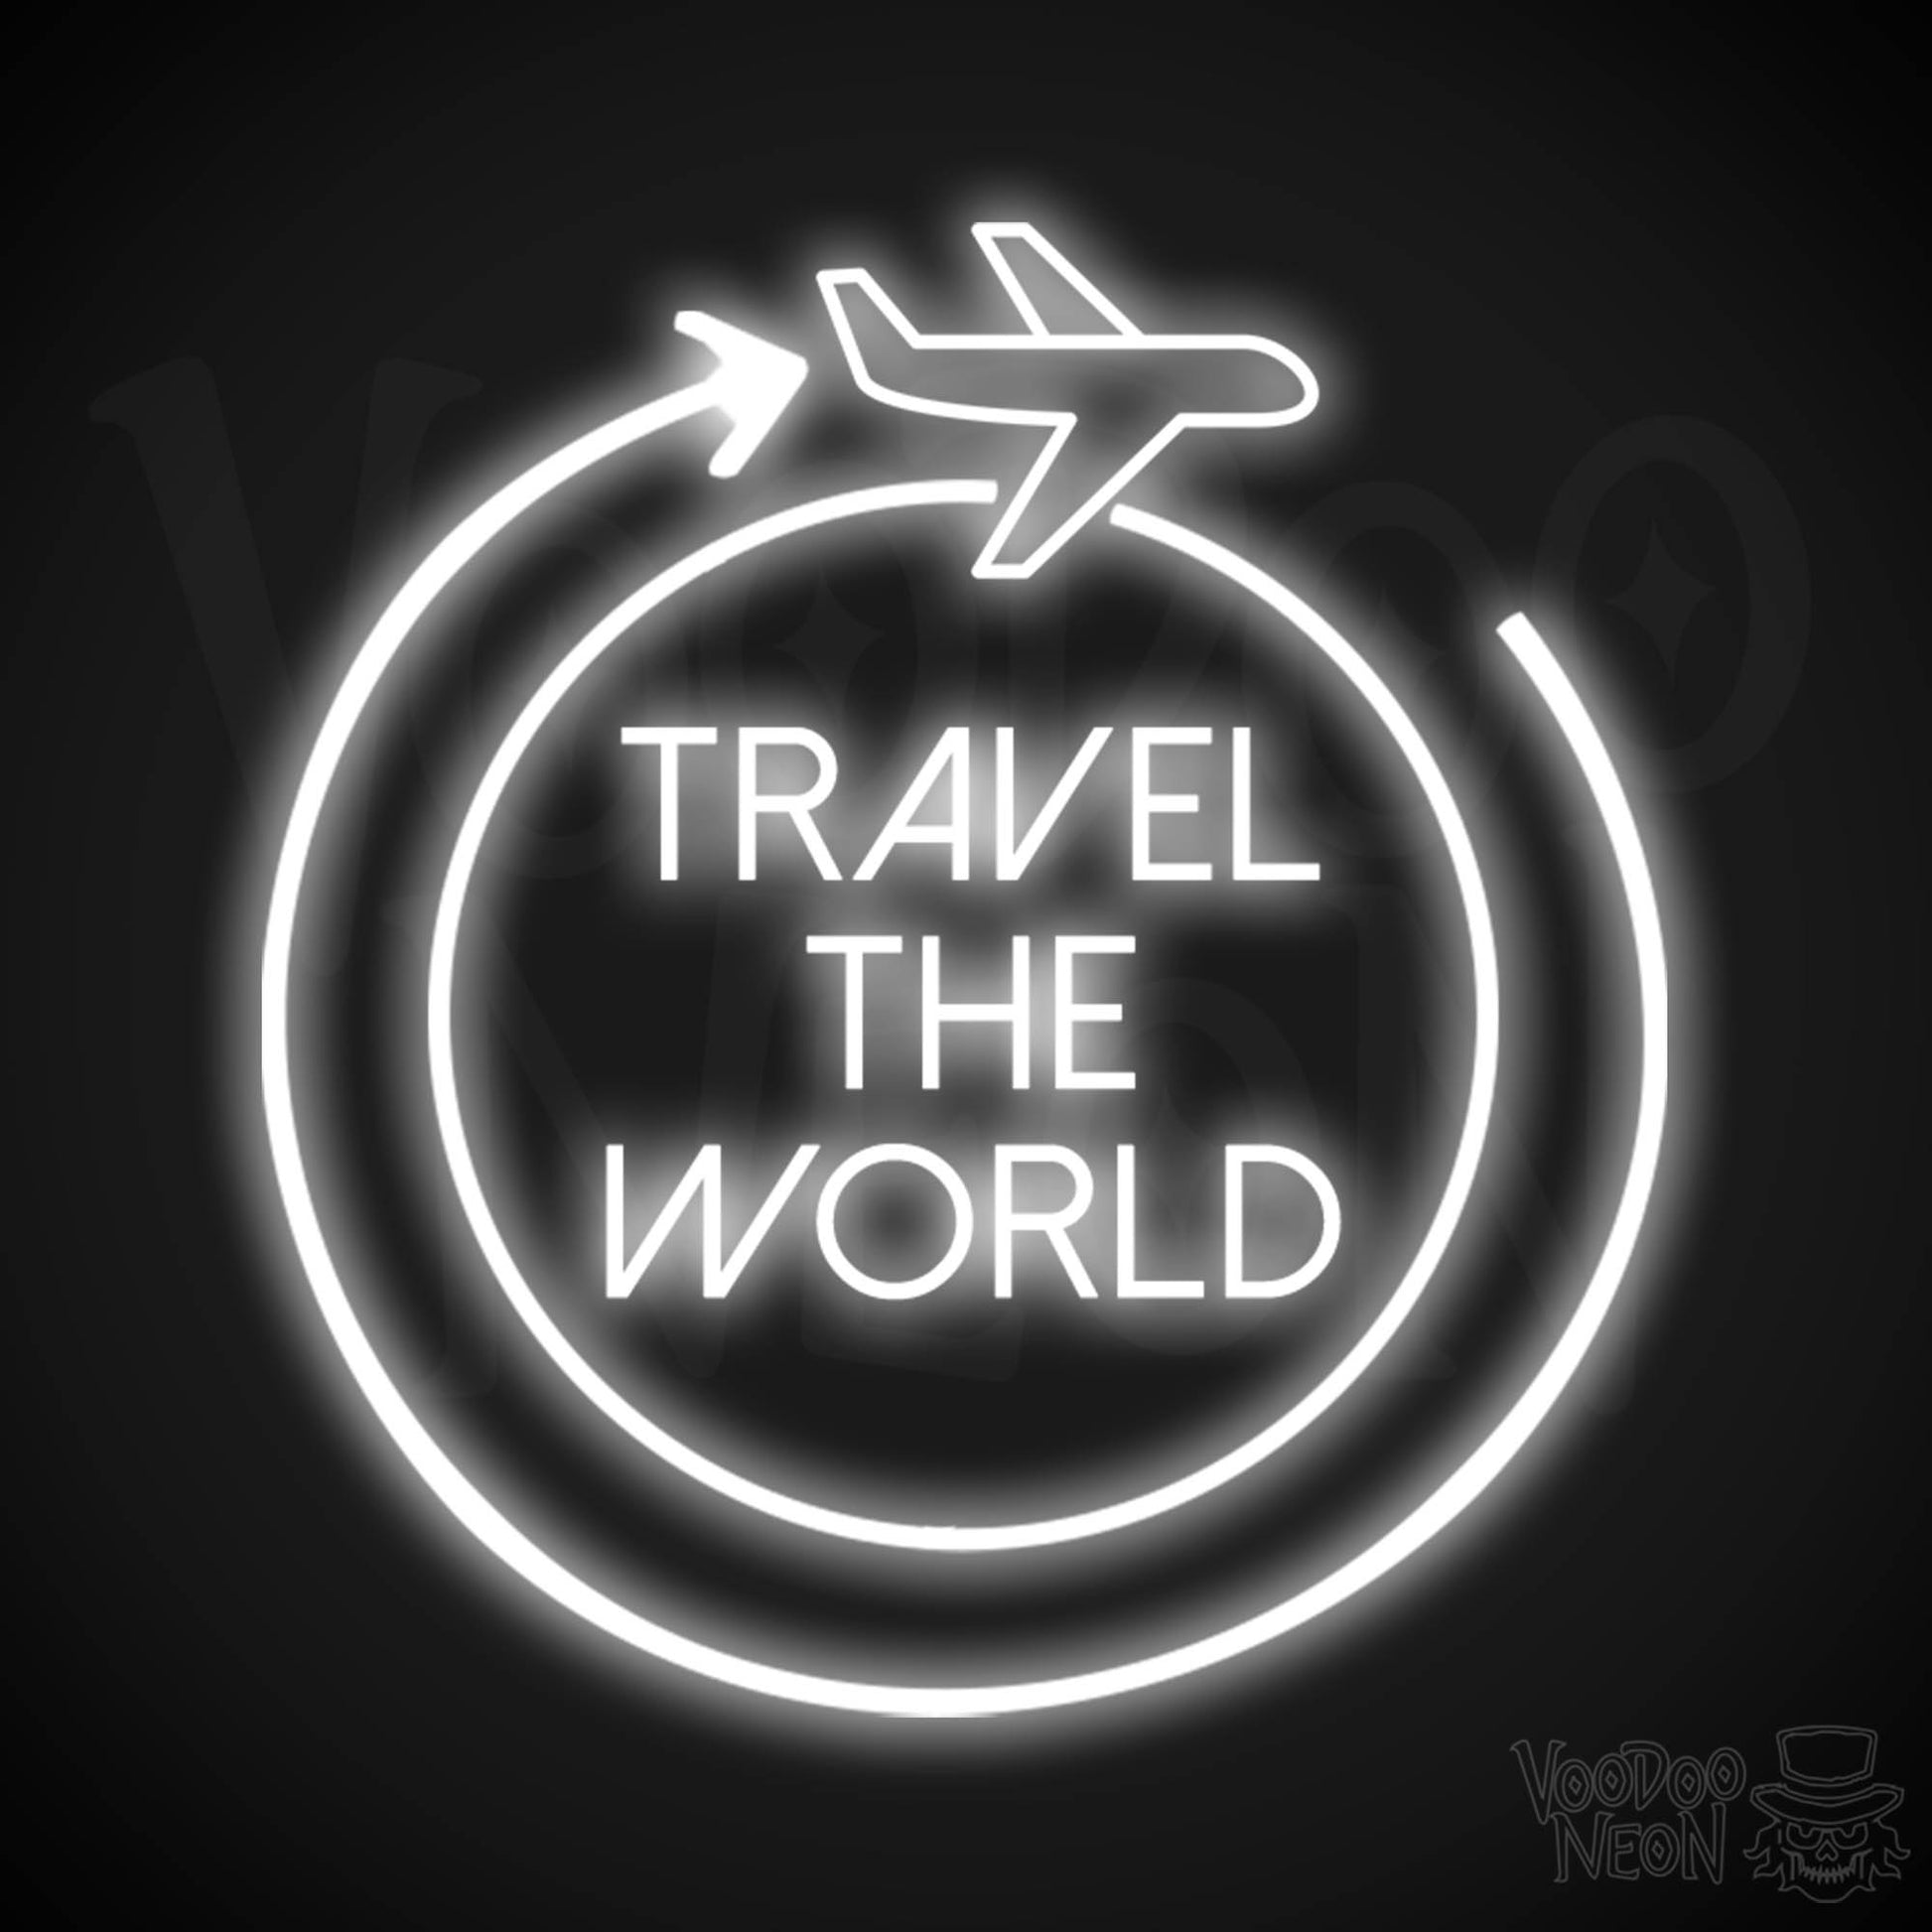 Let's Travel The World Neon Sign - LED Neon Wall Art - Color White